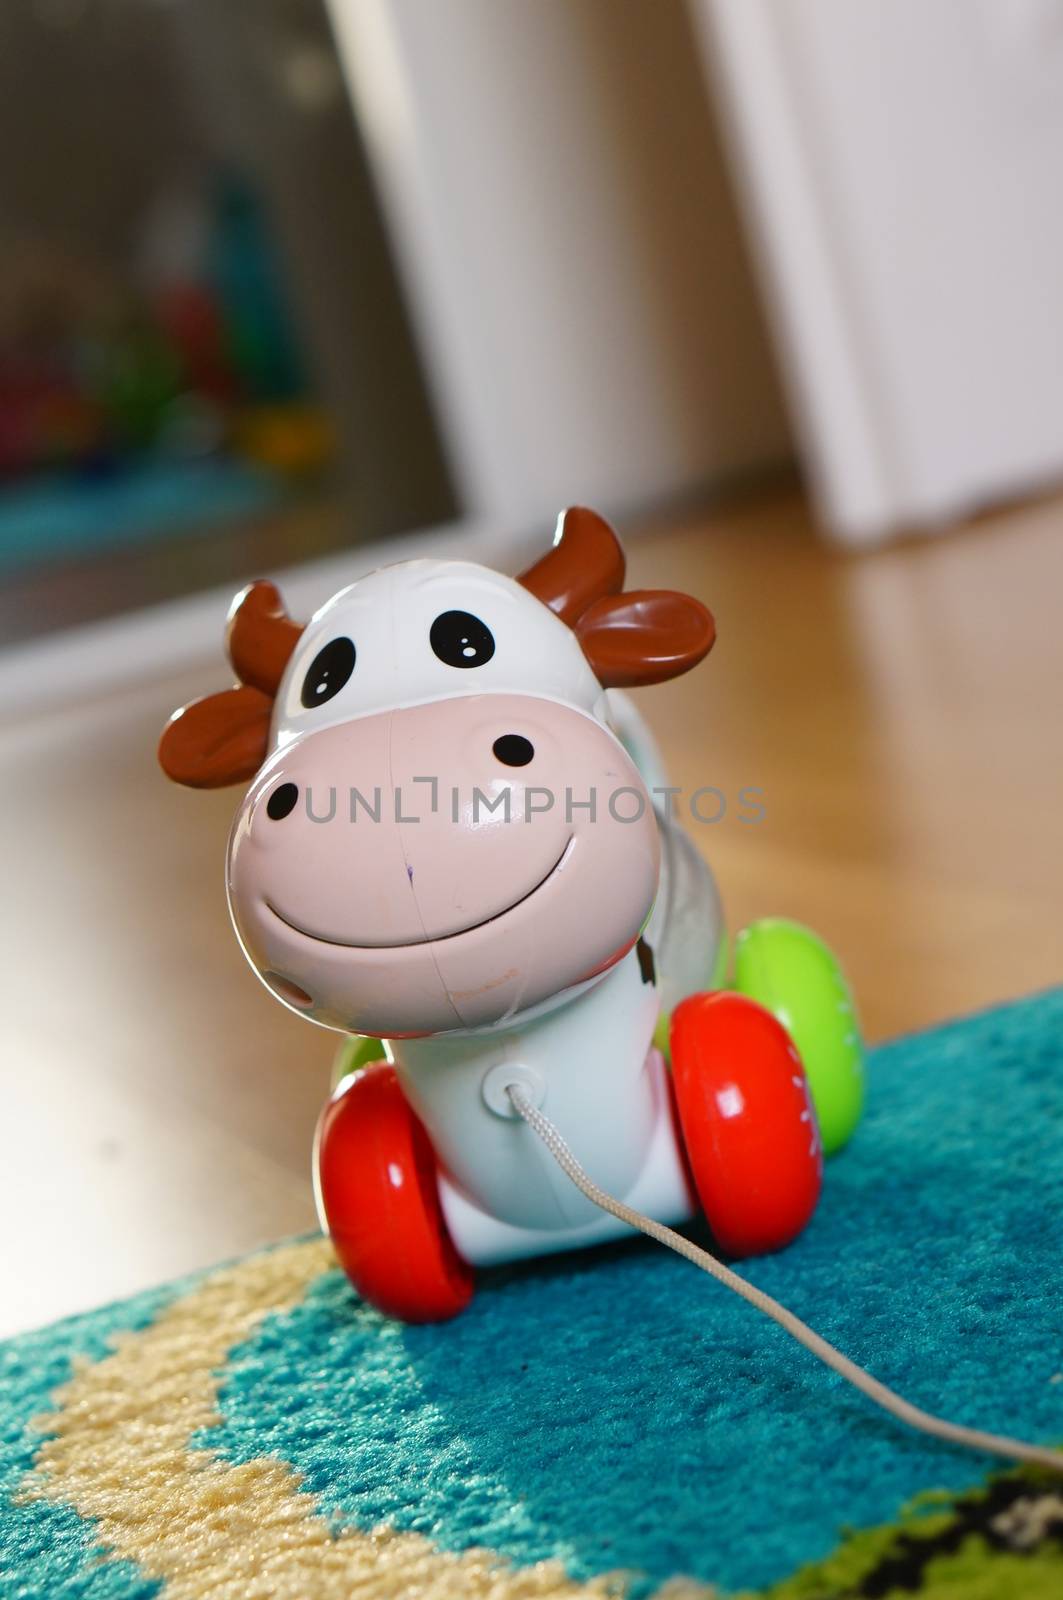 POZNAN, POLAND - AUGUST 20, 2015: Wheeled toy cow with pull rope on the floor